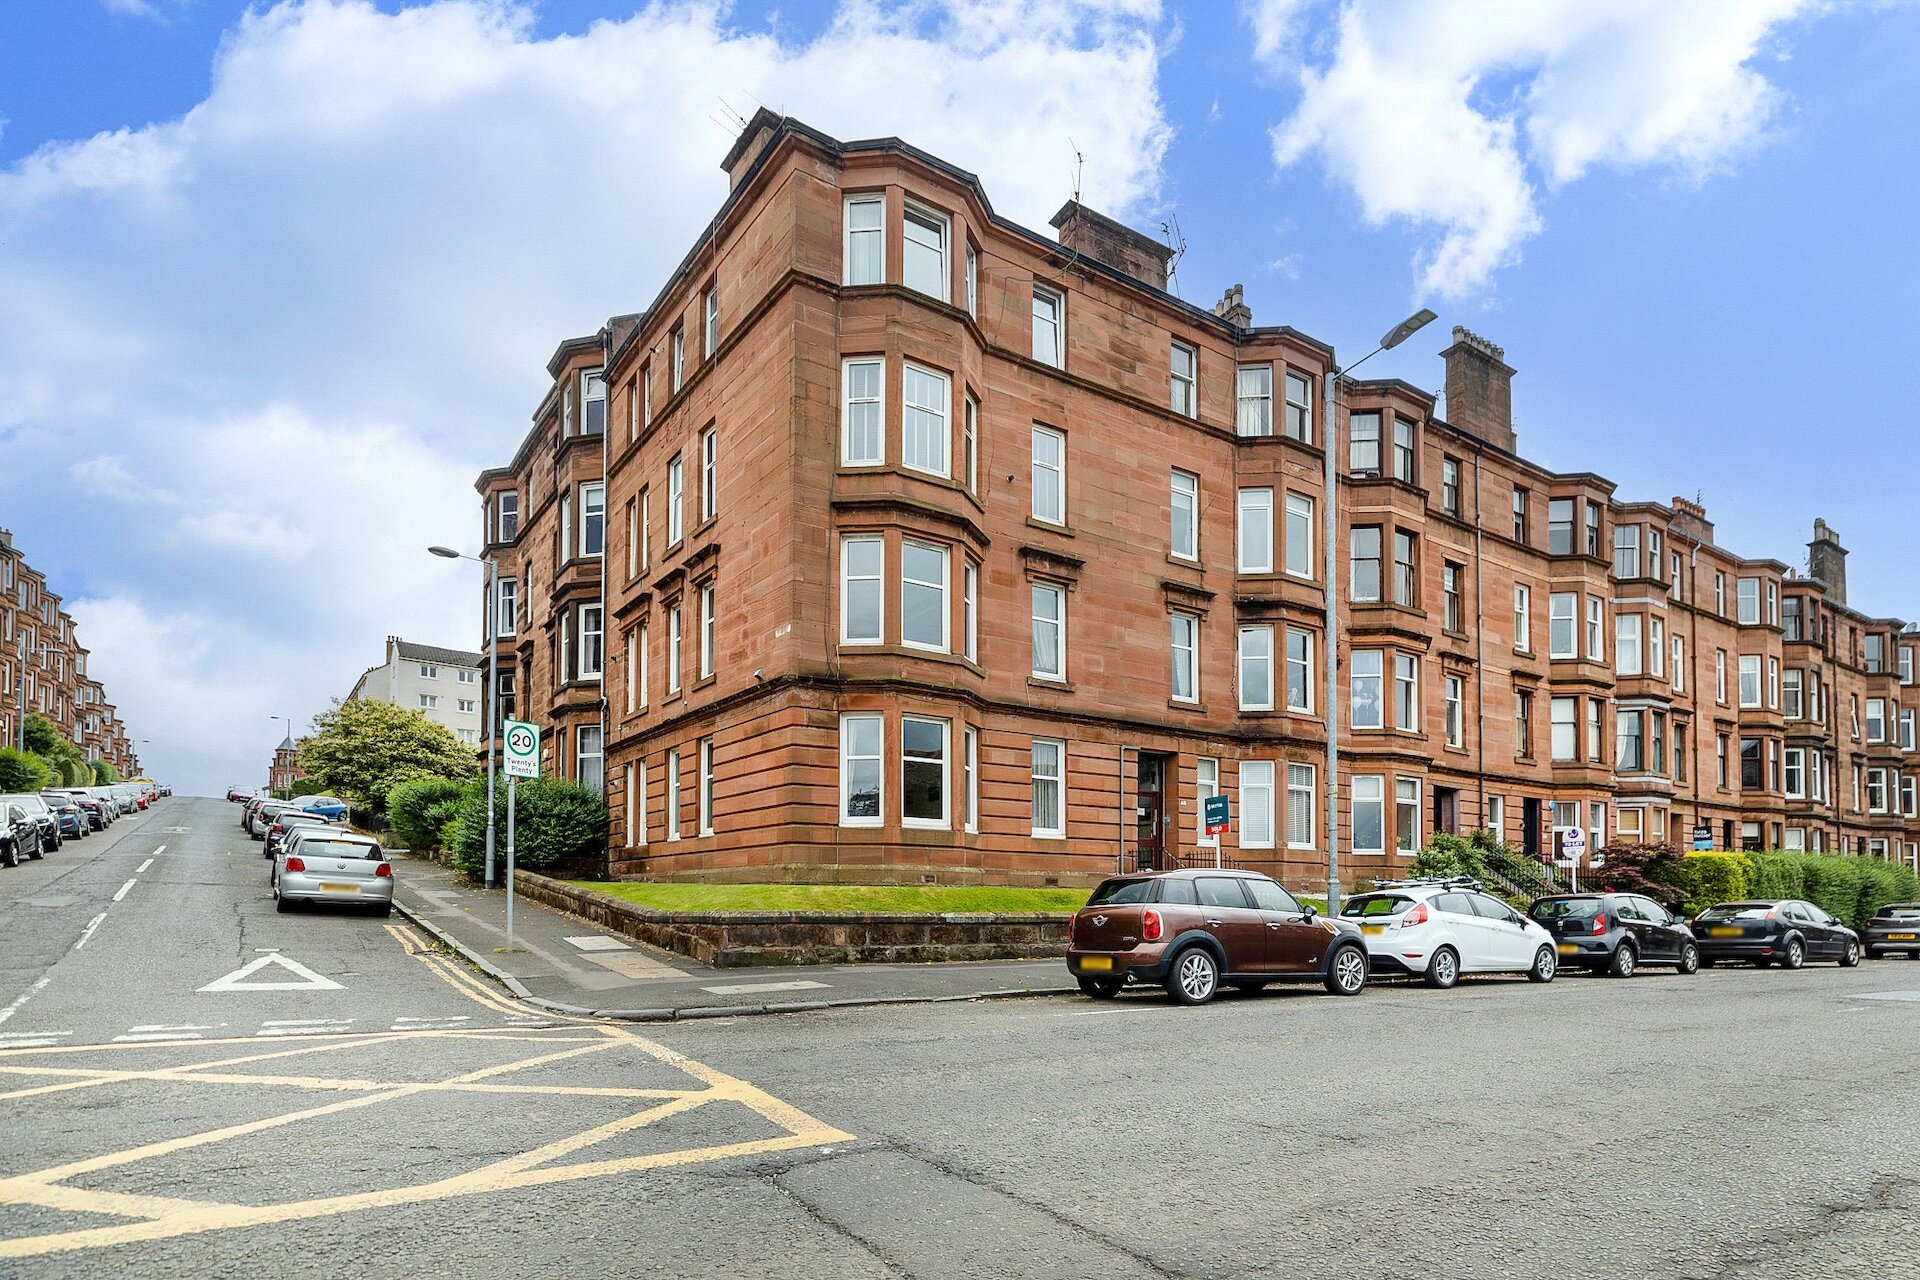 0/1, 203 Crow Road, Broomhill, Glasgow, G11 7PY - Picture #1